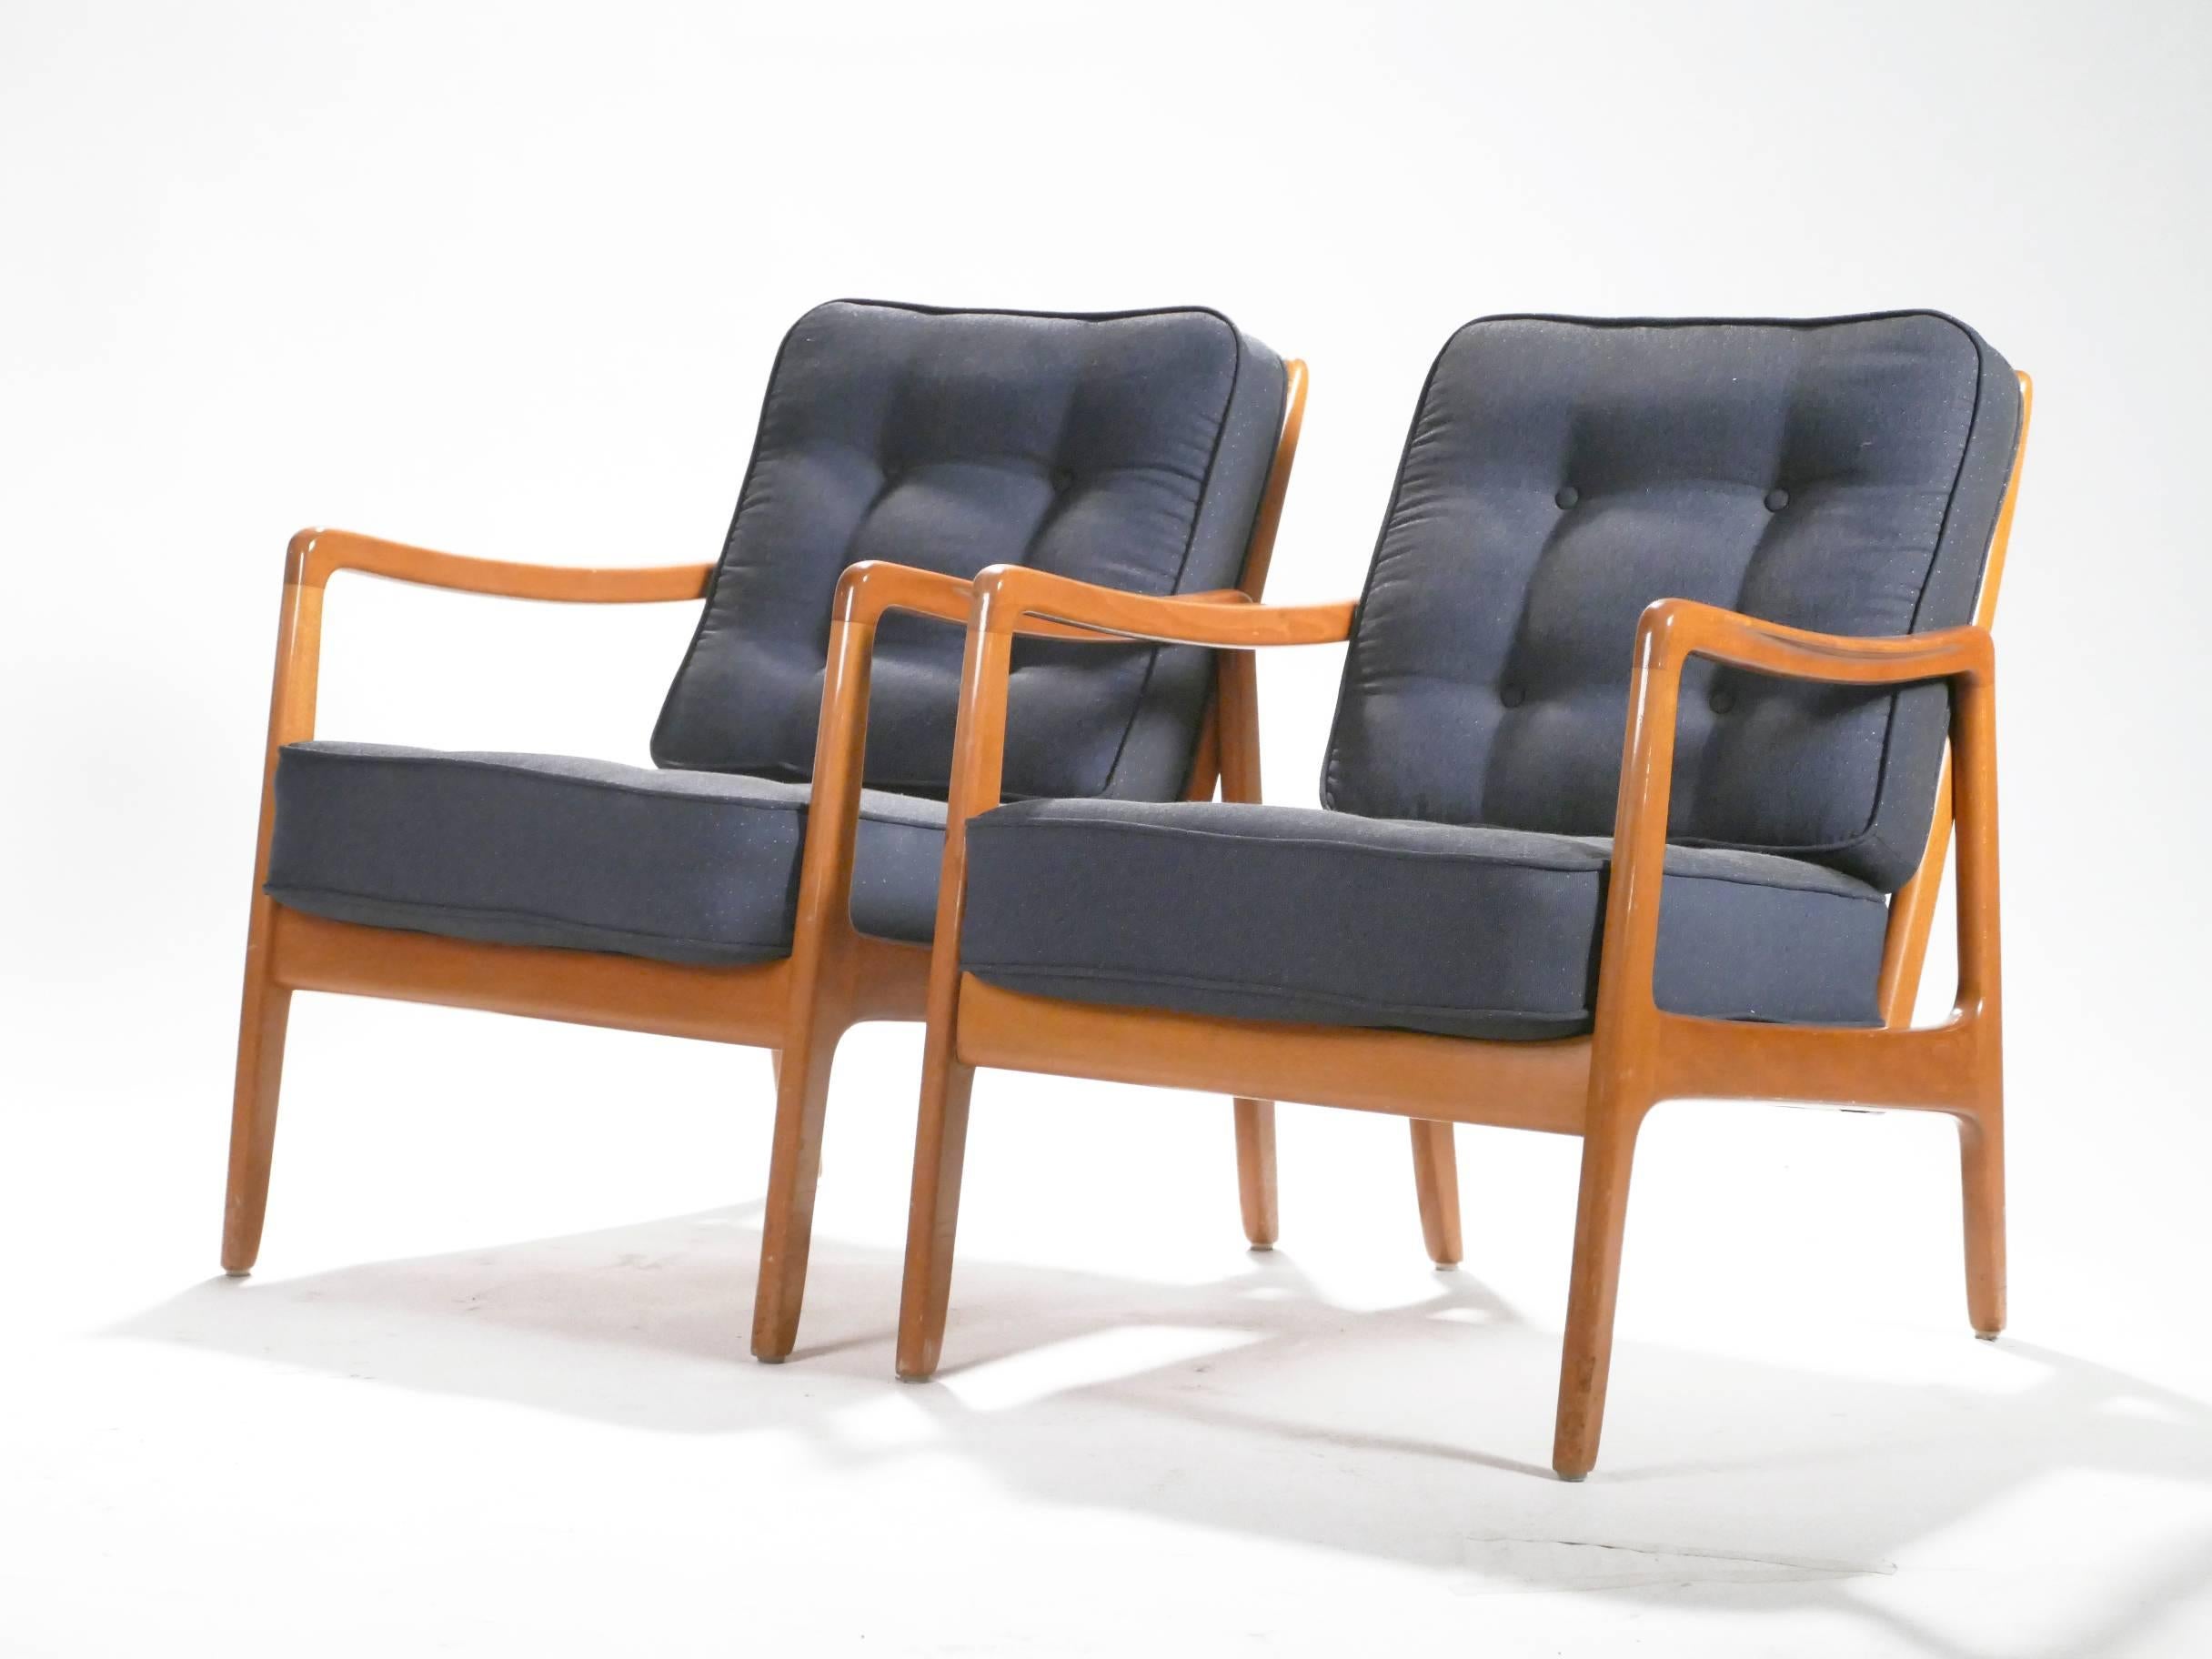 Renowned Danish designer Ole Wanscher is credited for being influential during the height of the acclaimed Scandinavian design movement that took place during the mid-century. His FD109 armchairs, designed during the 1960s for respected Danish